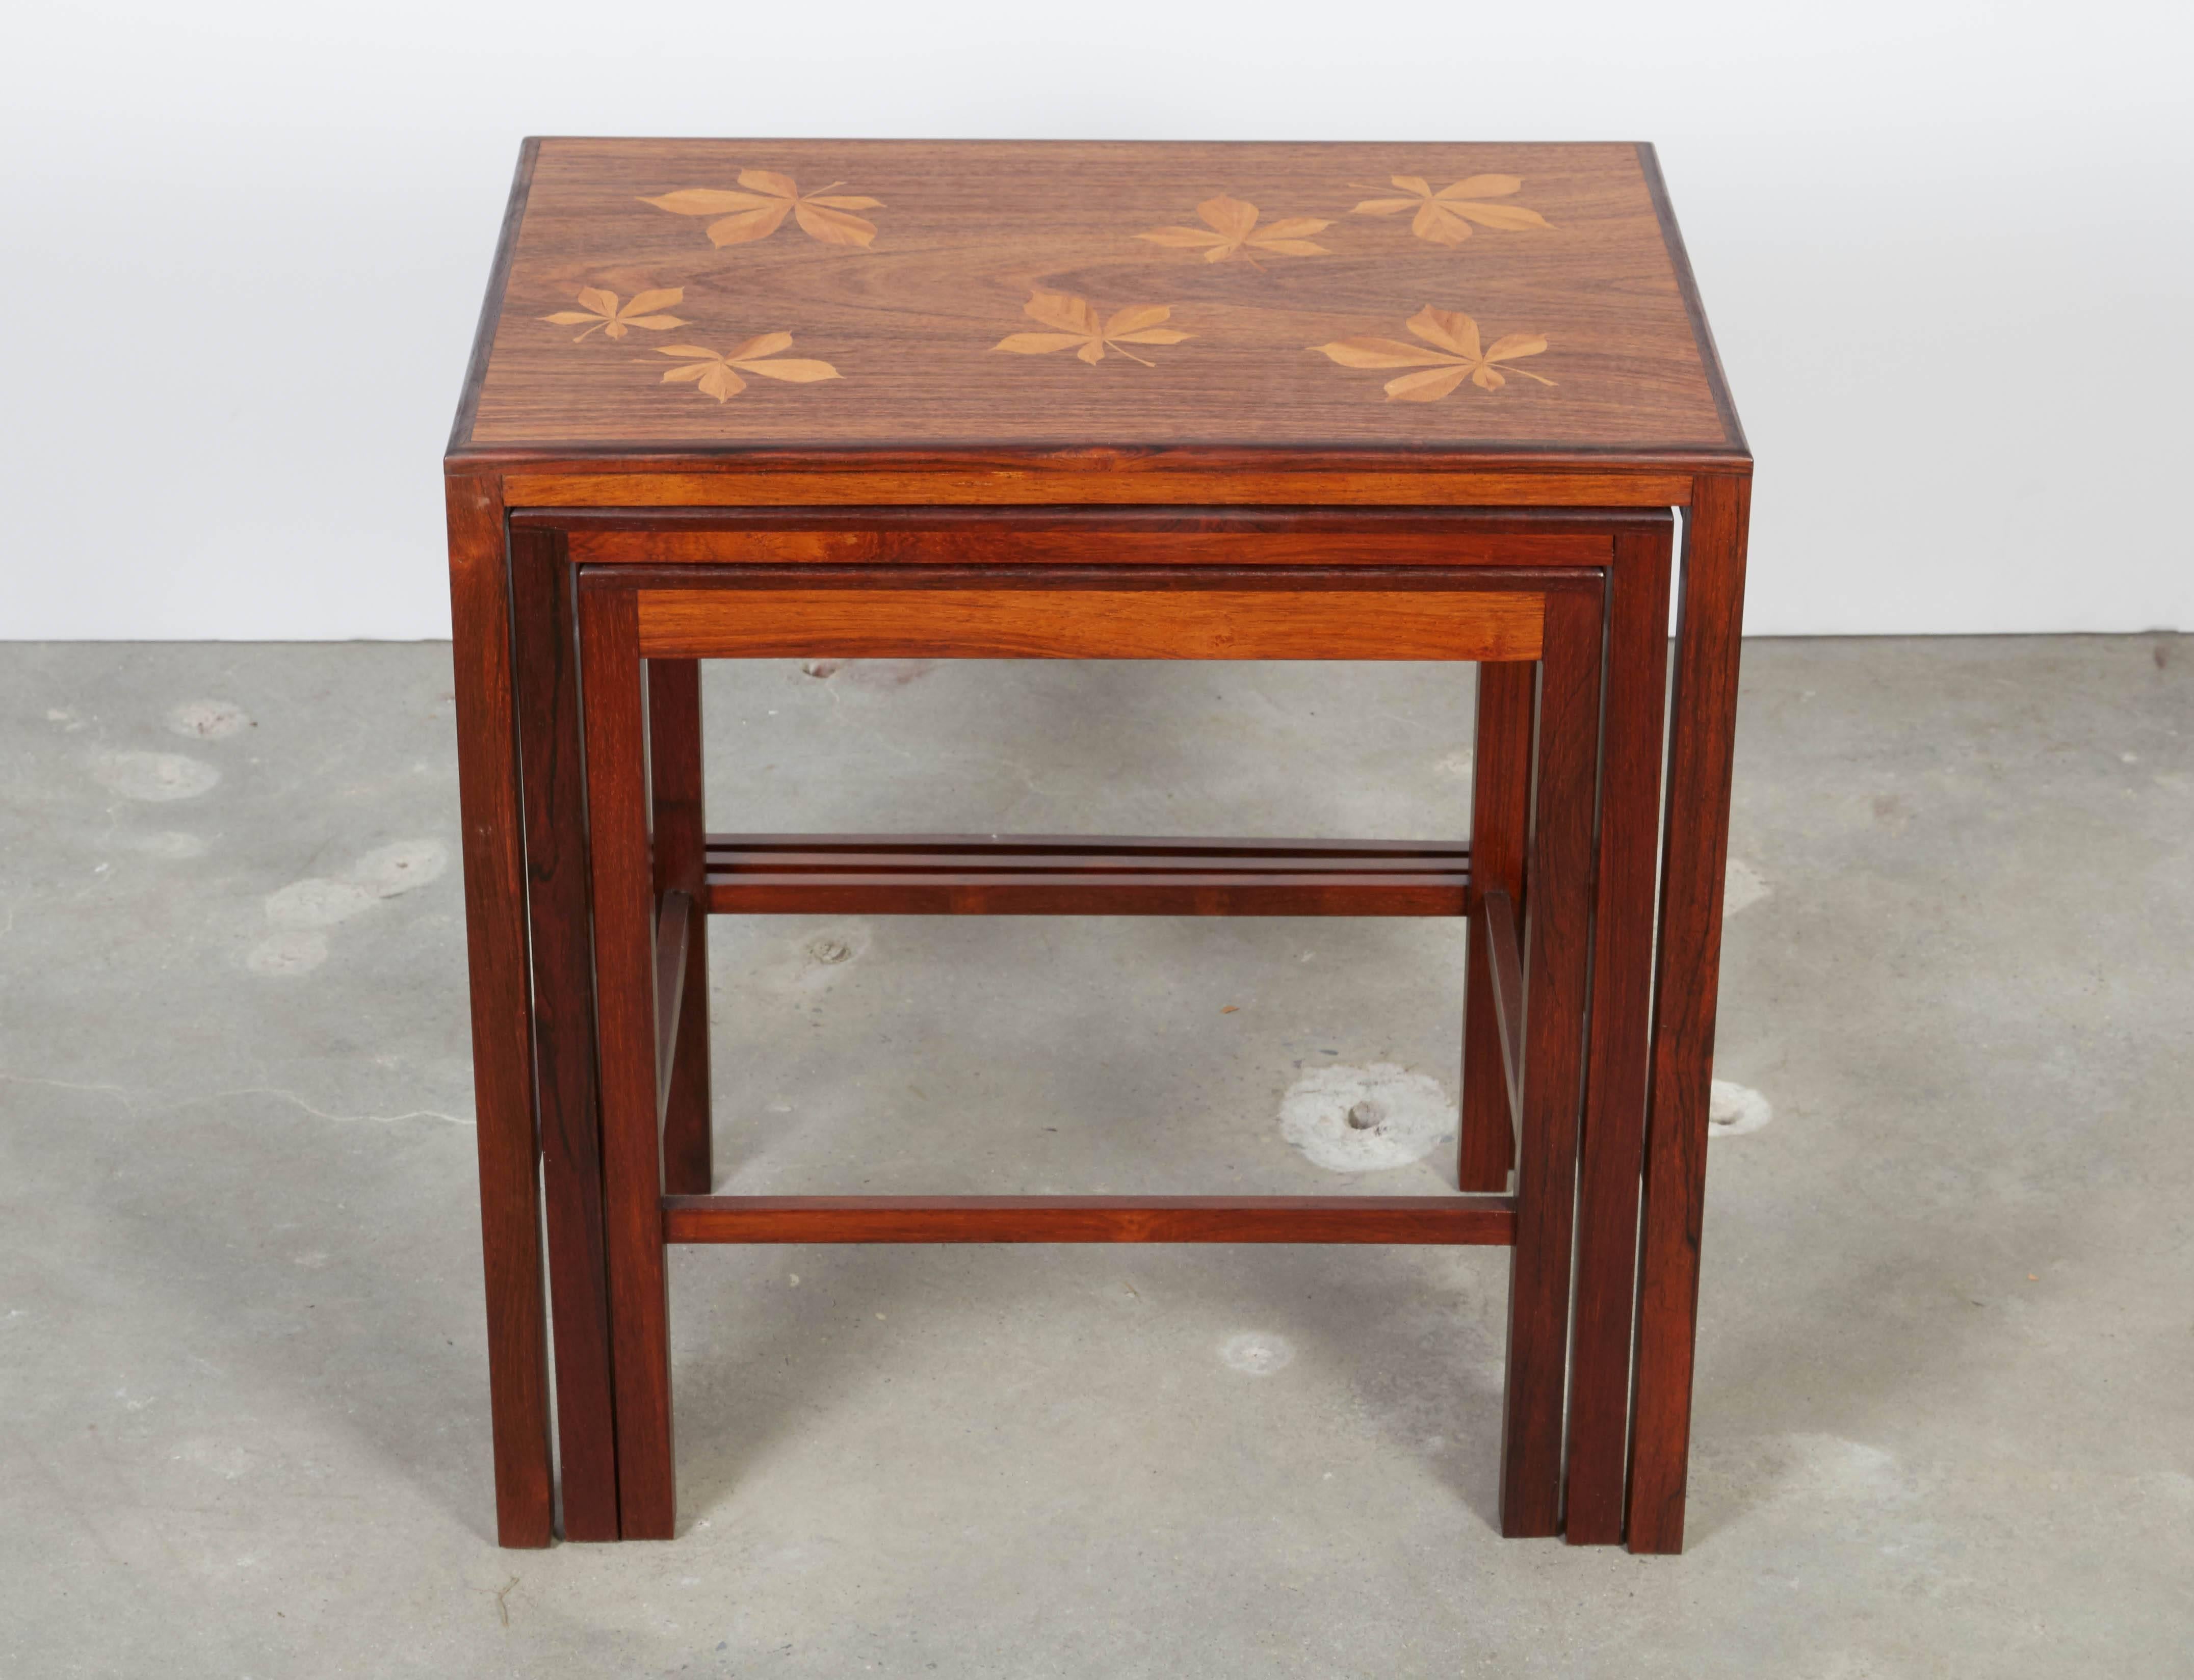 Vintage 1960s Mid Century Rosewood Nesting Tables with Leaf Chestnut Inlay

This set of Modern nesting tables are excellent condition and have that amazing inlay. Great as bedroom nightstands or living room side tables. These are very special. Hard